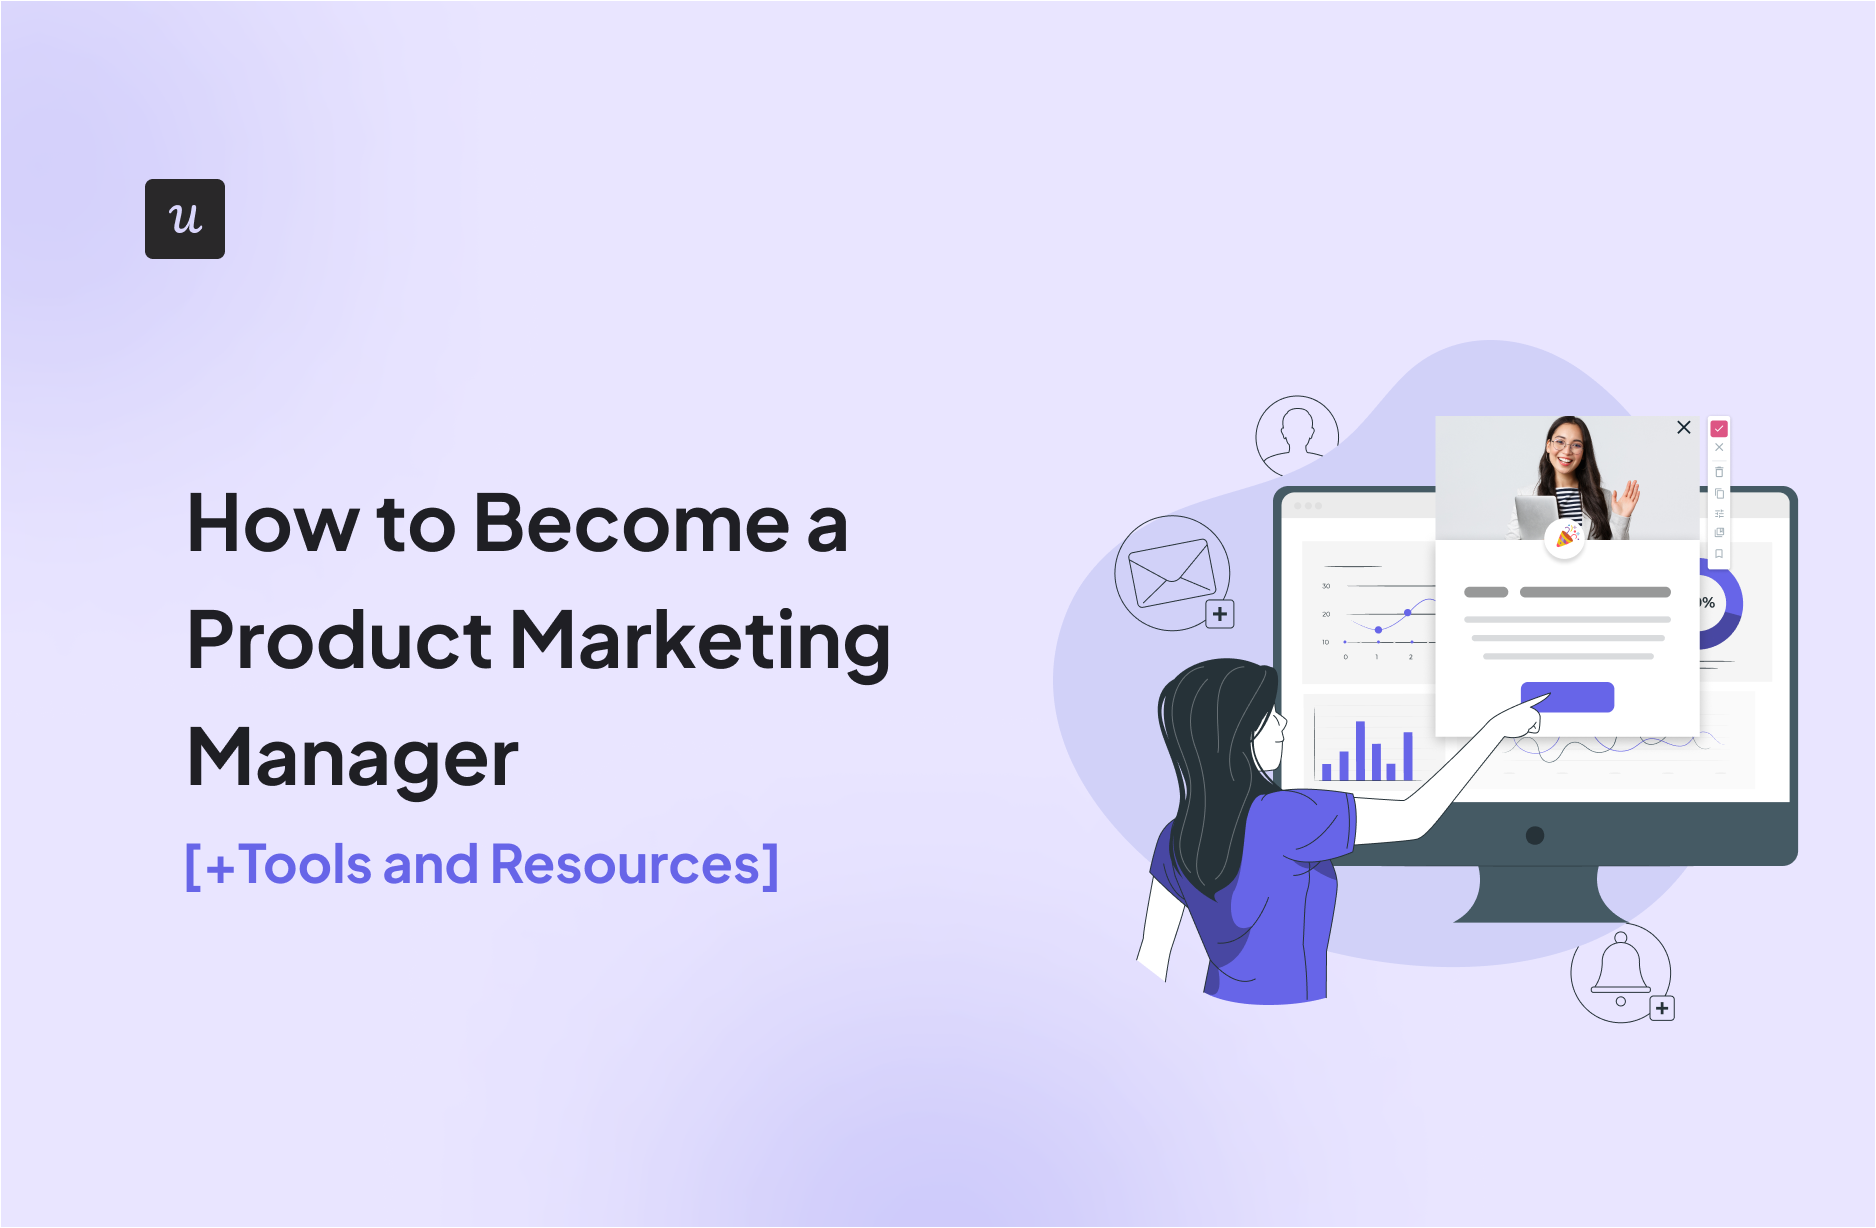 How to Become a Product Marketing Manager [+Tools and Resources]